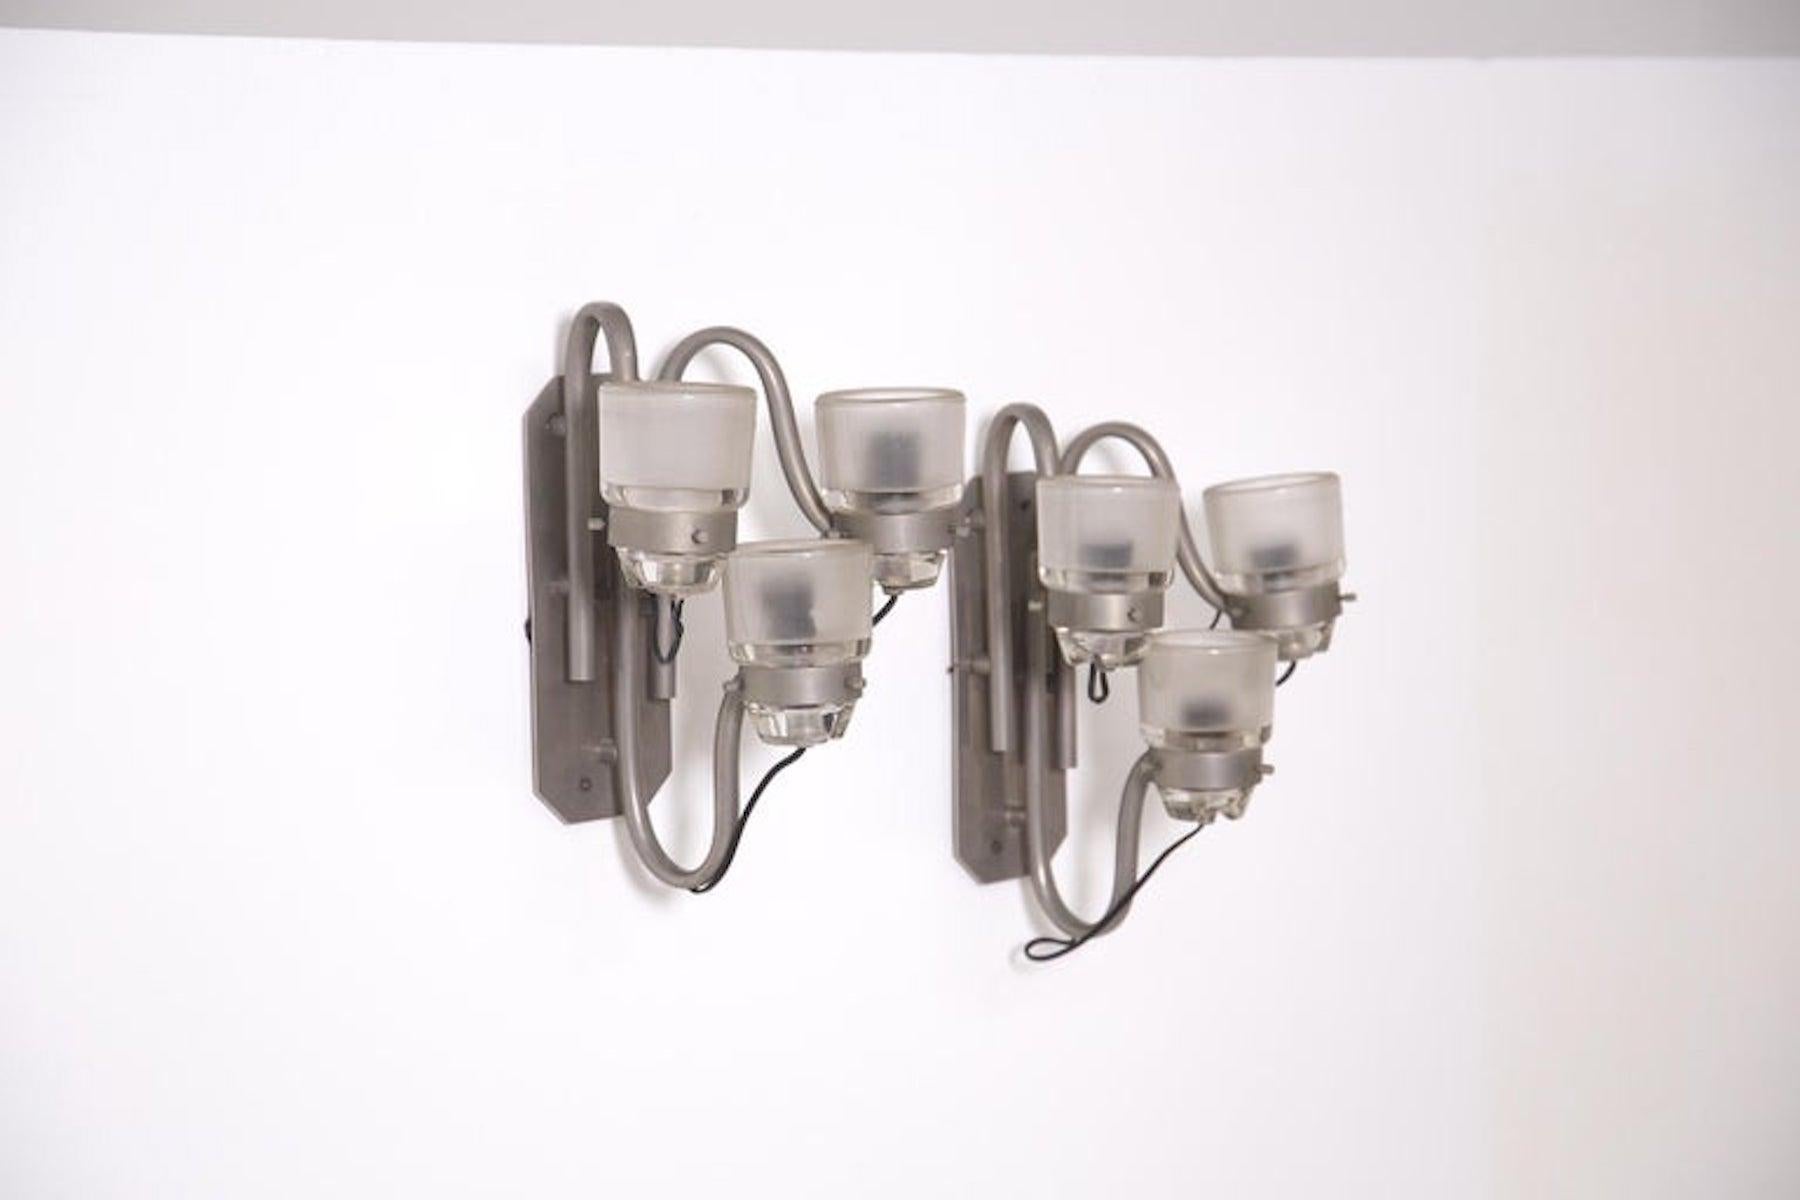 Mid-Century Modern Pair of Wall Lamp Attr. to Joe Colombo for Oluce in Nickel-Plated Brass